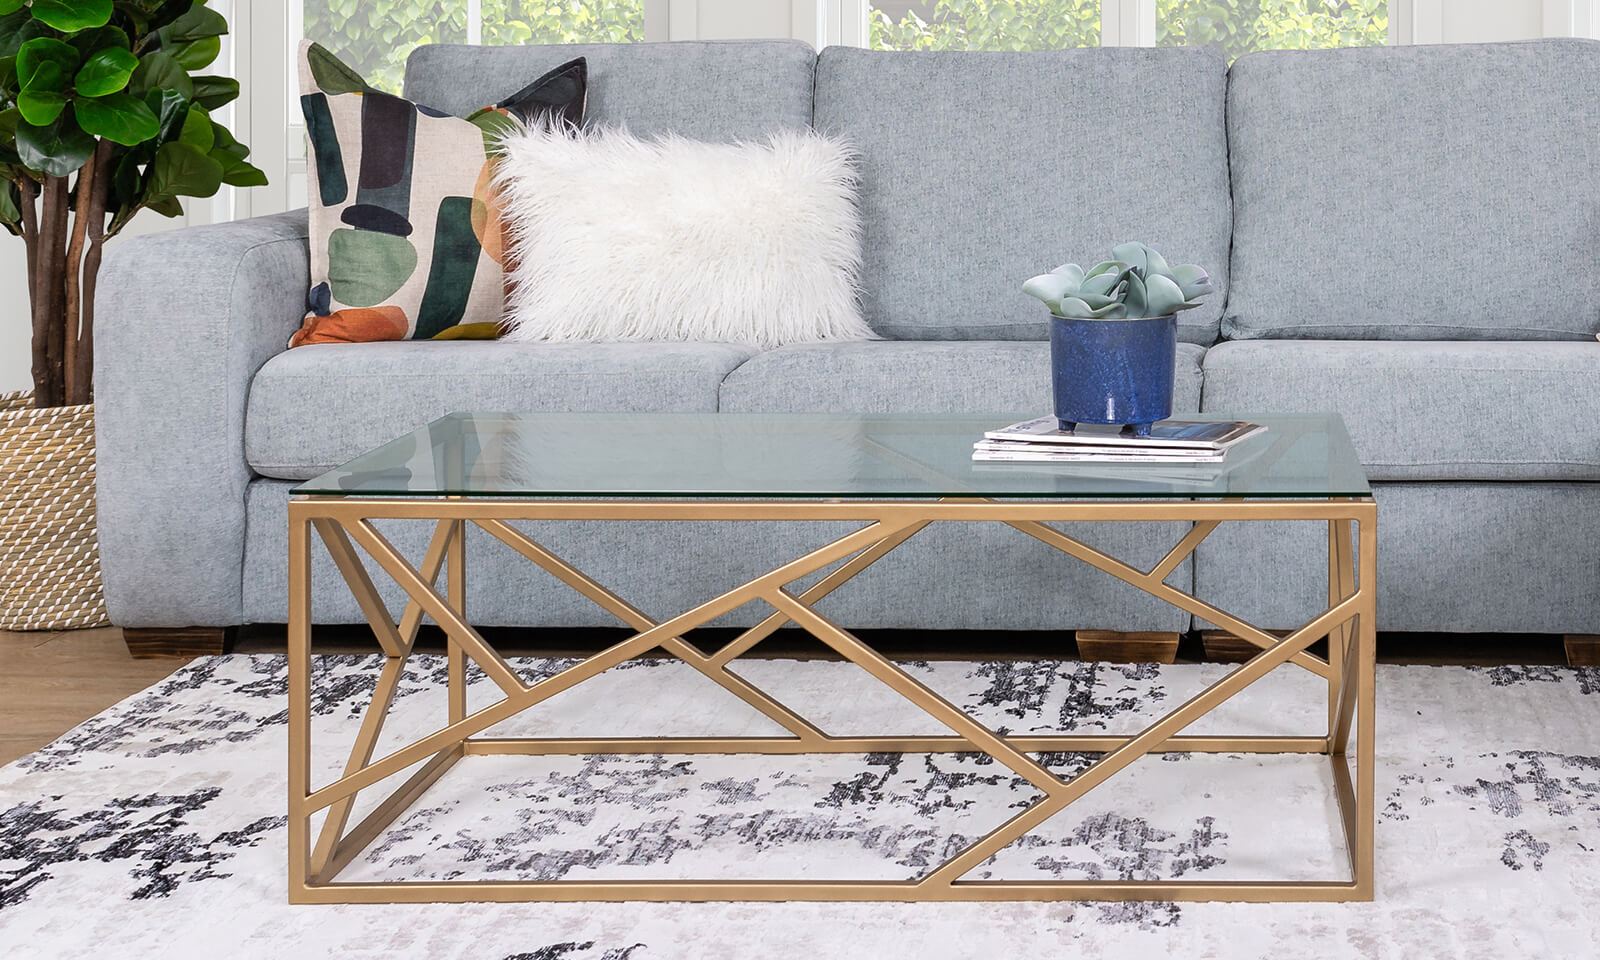 WHY YOU SHOULD BUY A GLASS COFFEE TABLE